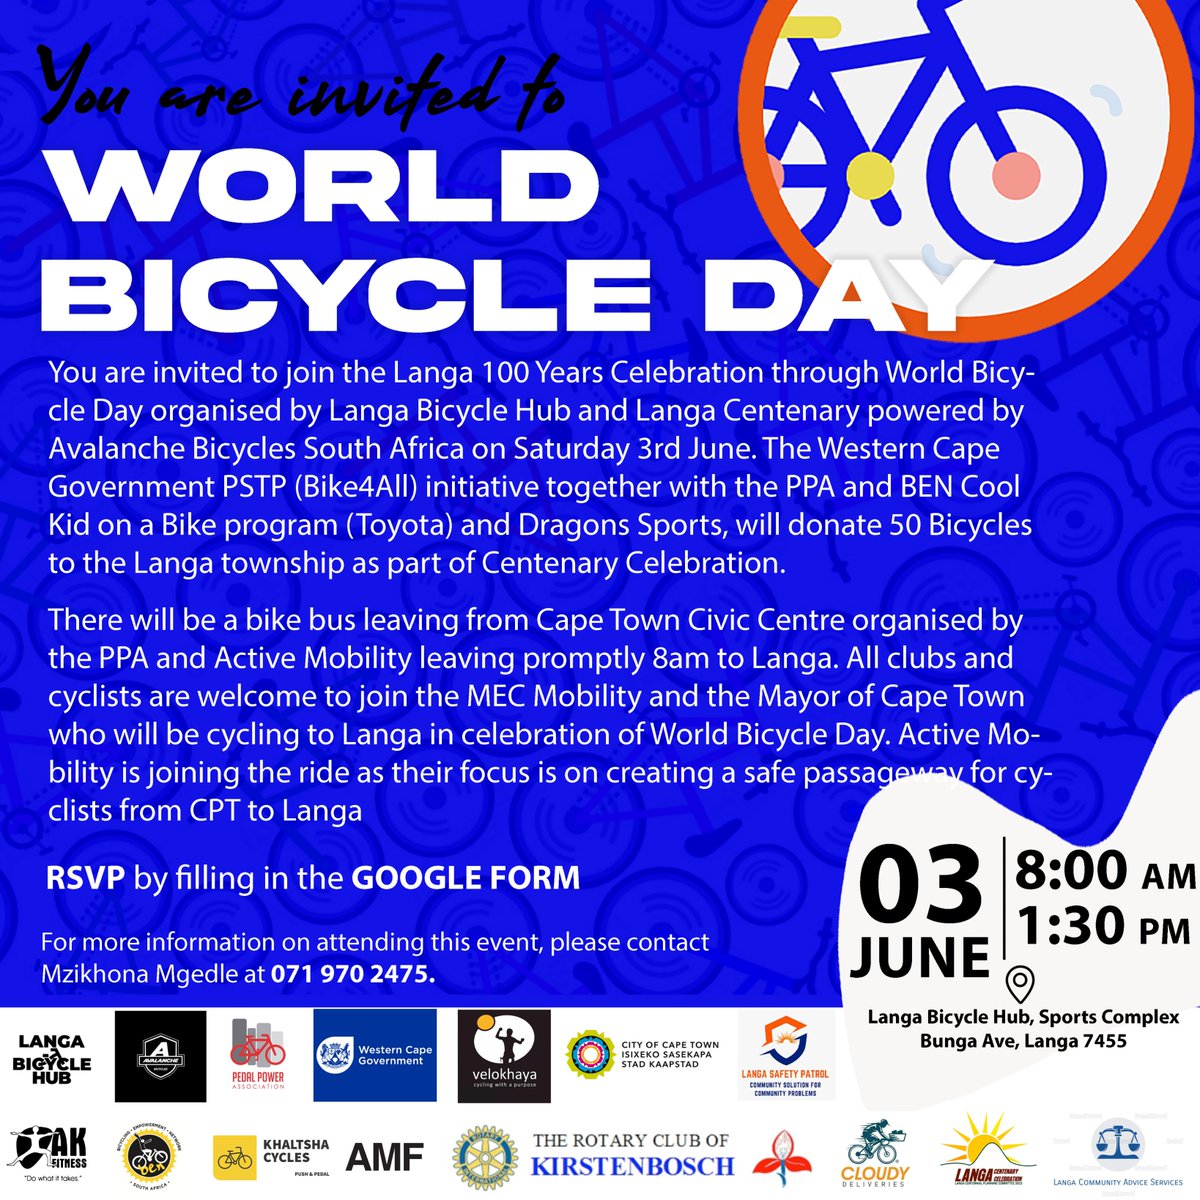 Come Celebrate World Bicycle Day with us this Saturday.